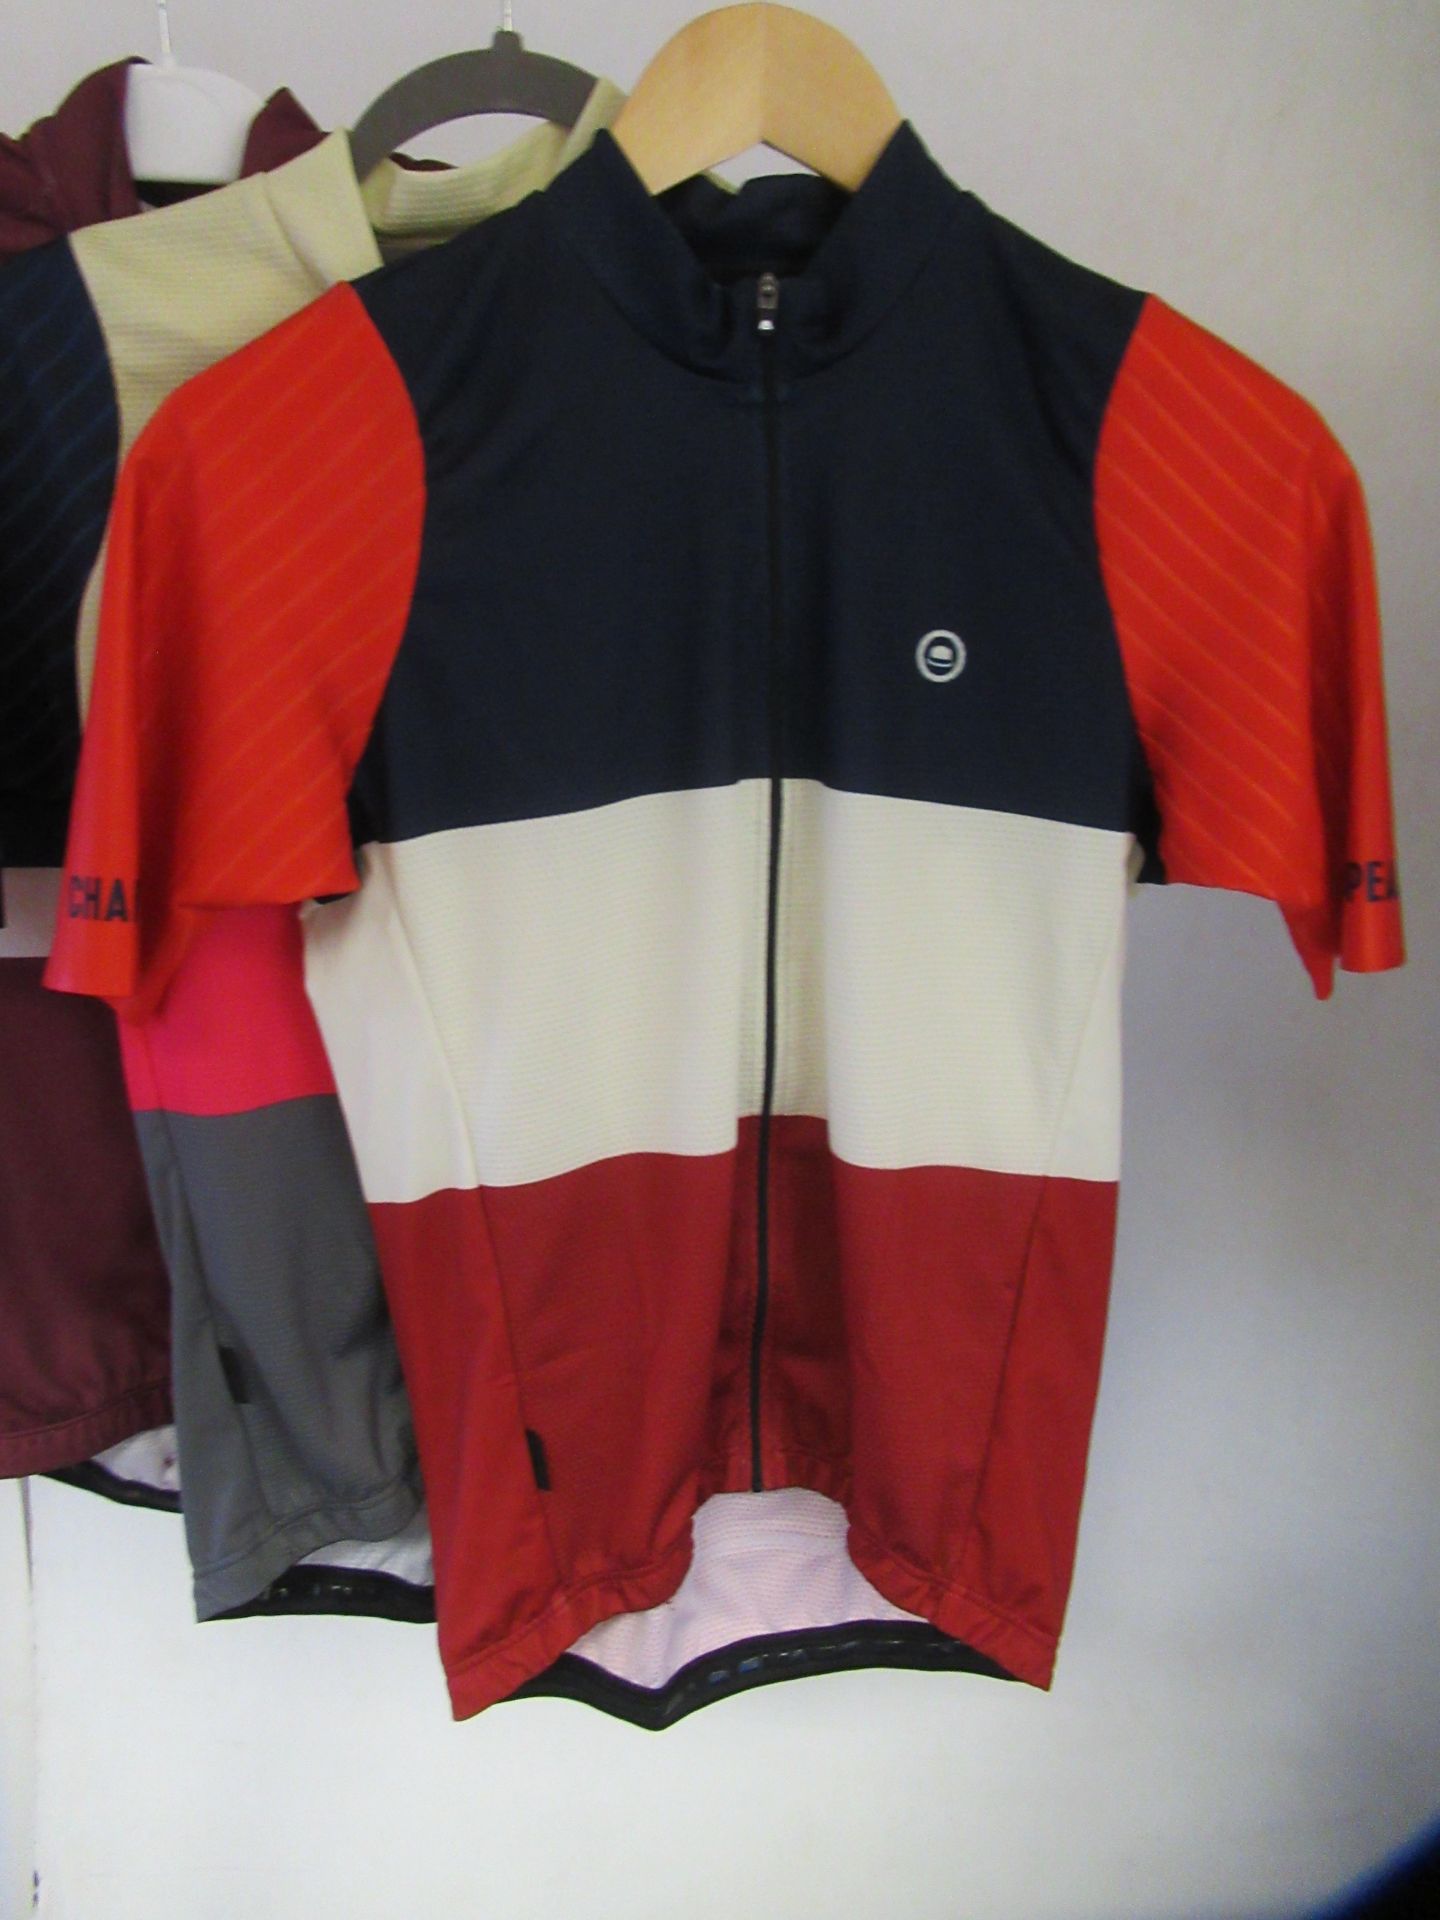 5x S Male Cycling Clothes - Image 4 of 6